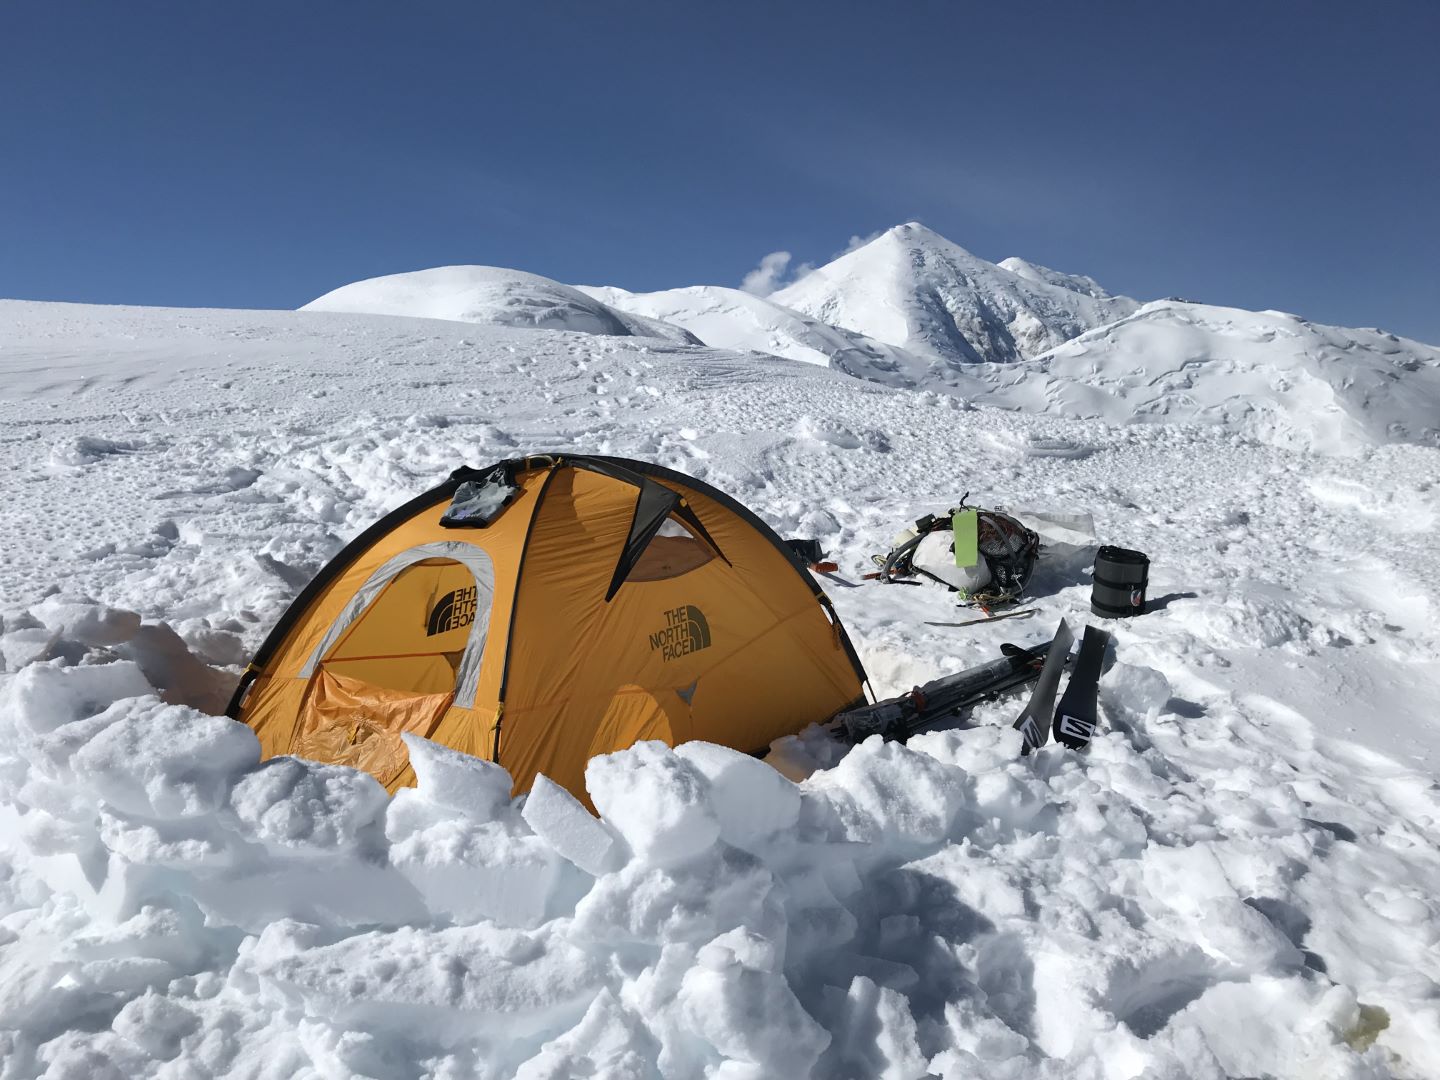 Camp near the south ridge of Kahiltna Dome, looking toward Crosson and Foraker